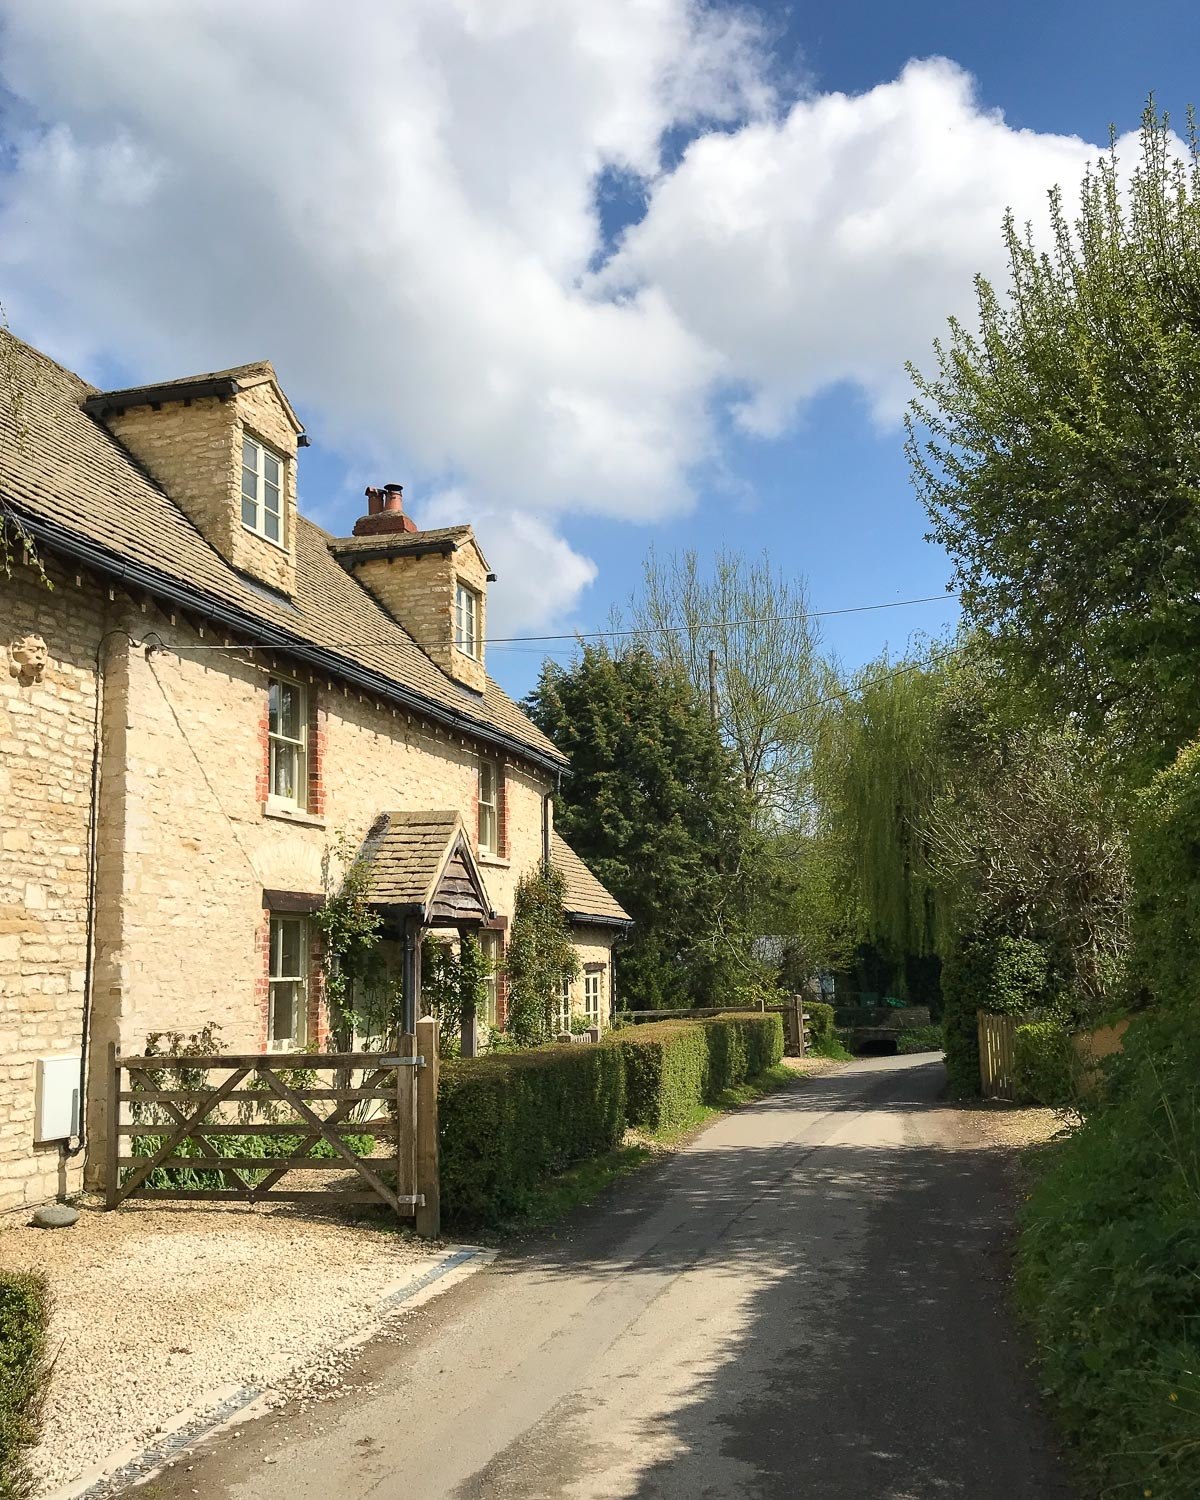 The pretty hamlet of Kilcott on the Cotswold Way